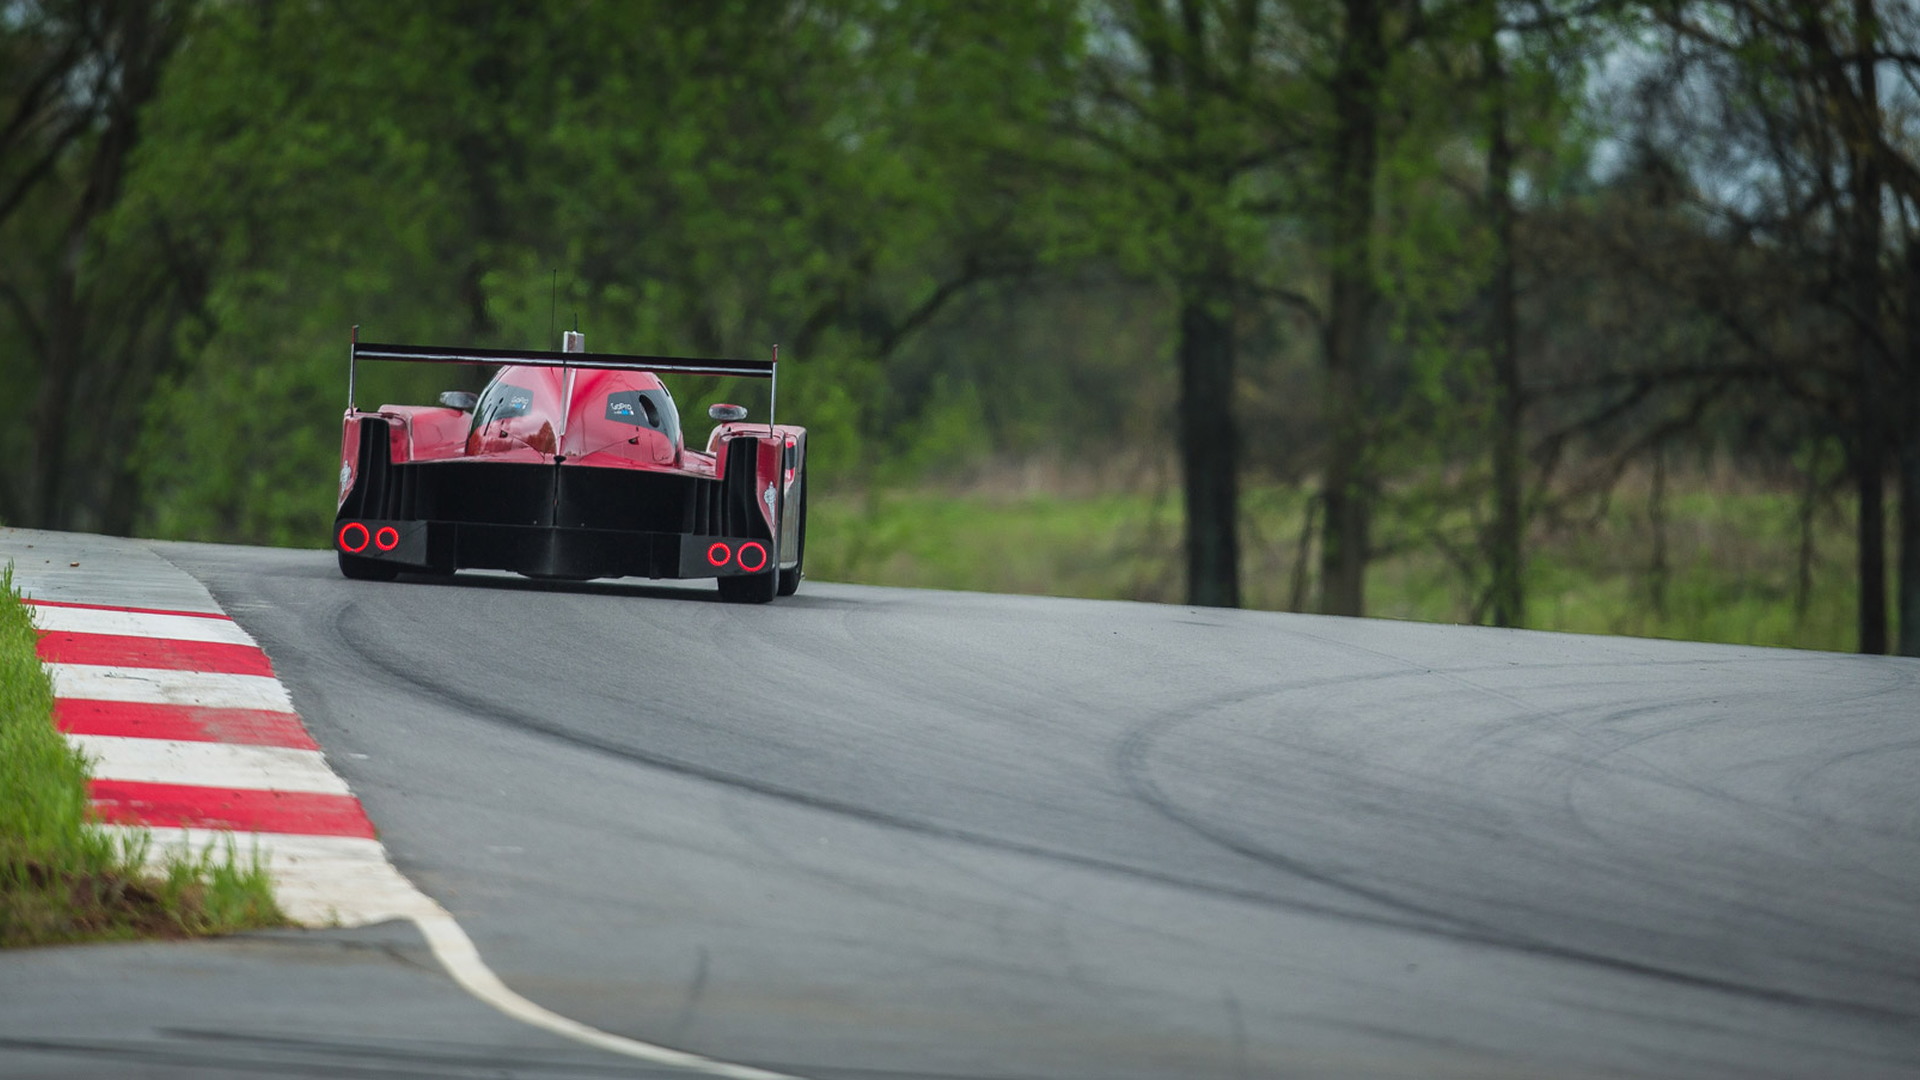 2015 Nissan GT-R LM NISMO LMP1 testing at NCM Motorsports Park in Bowling Green, Kentucky